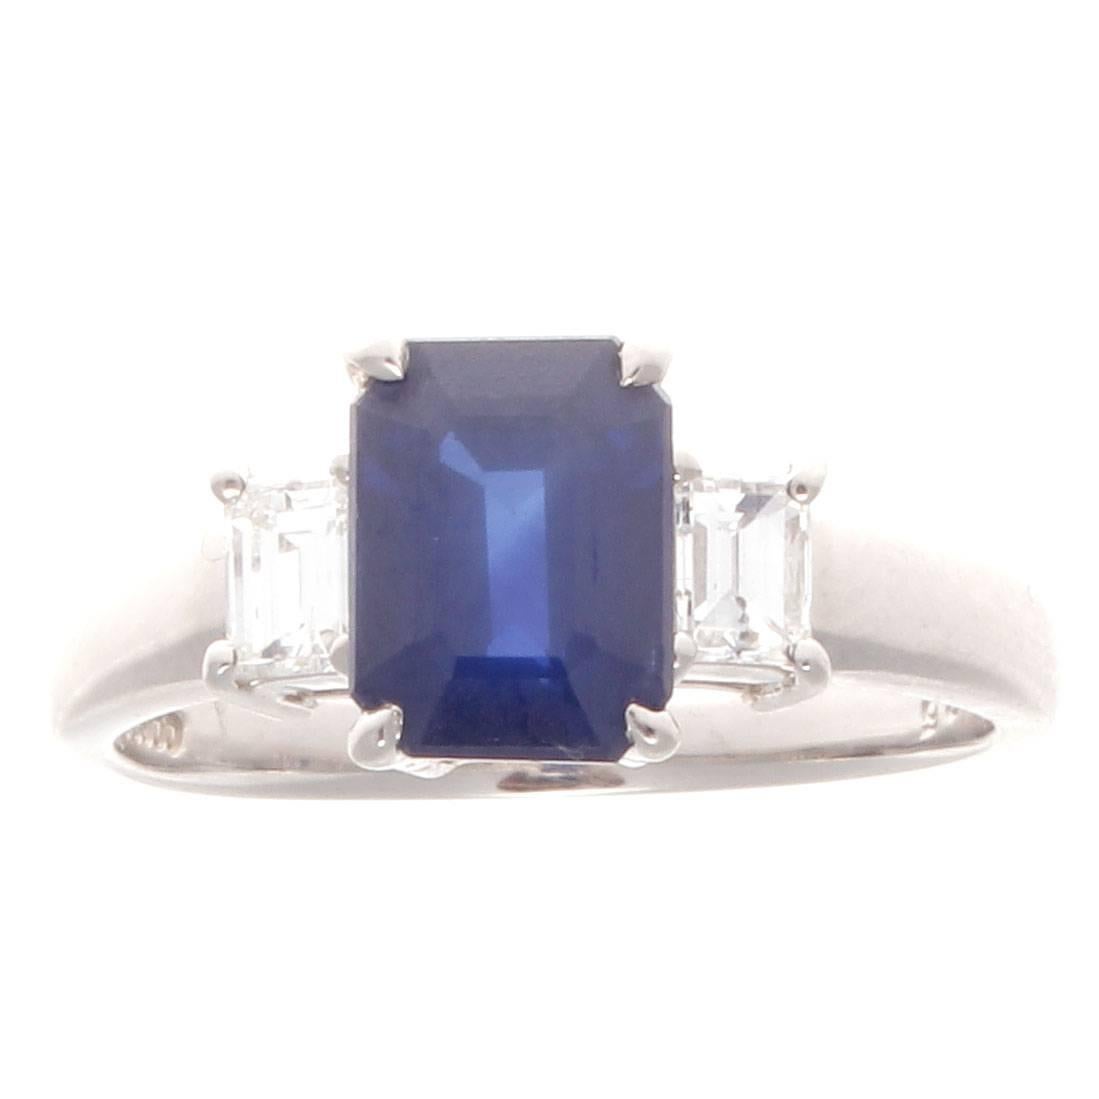 The classic and endearing three stone ring that uses a modern ideology to not conform by doing something slightly untraditional for an engagement ring. Featuring a 2.26 carat natural royal blue sapphire beautifully accented by a single emerald cut